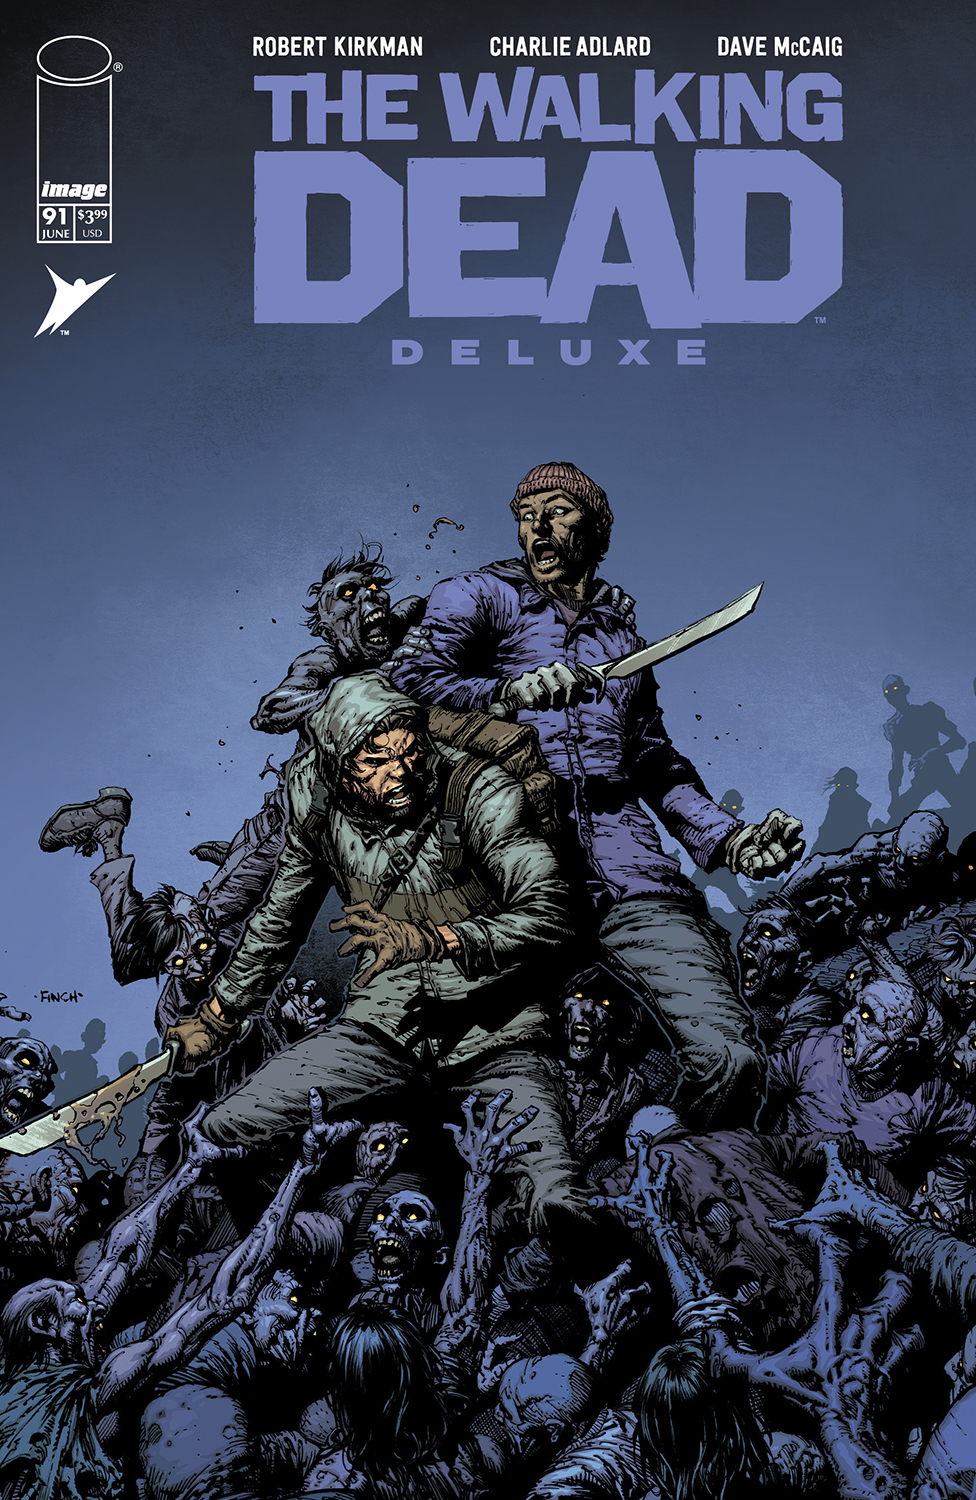 Walking Dead Deluxe #91 Cover A David Finch & Dave Mccaig (Mature)